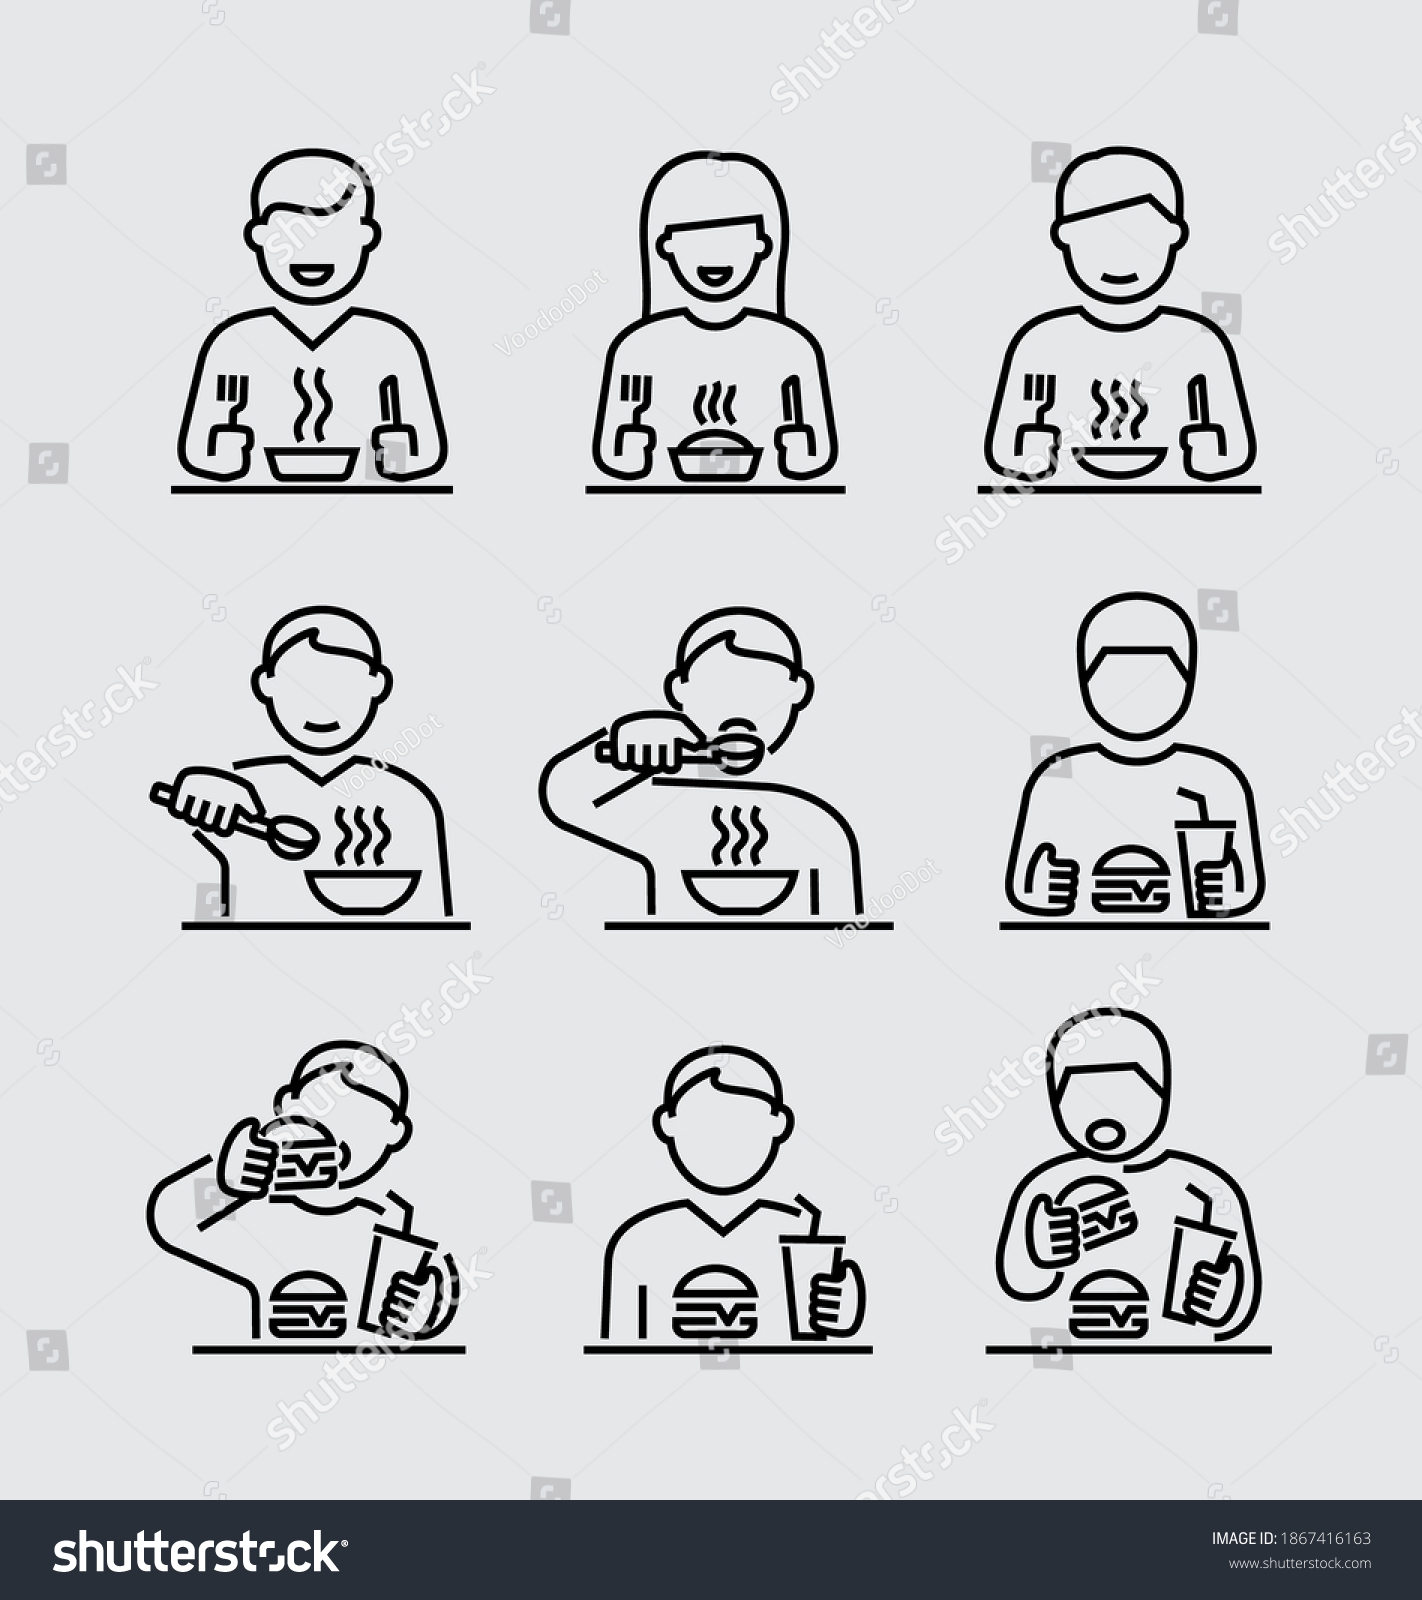 People Eating Vector Line Icons #1867416163